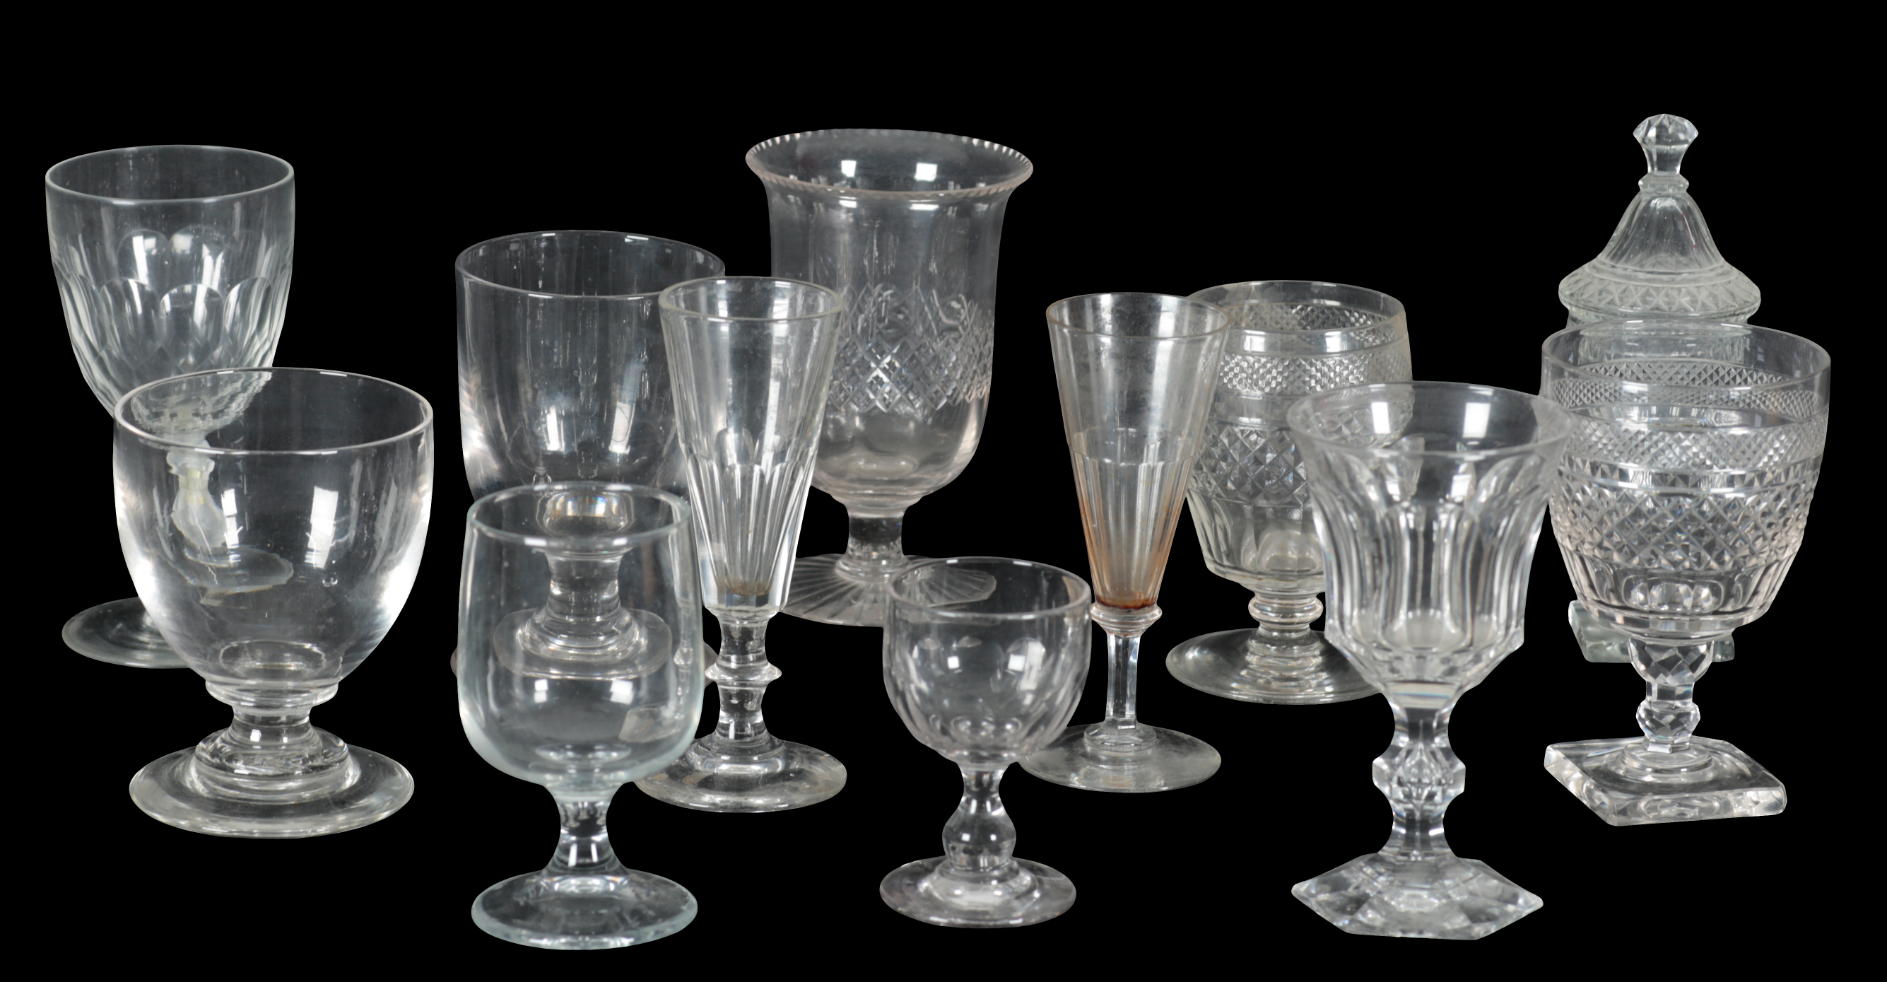 AN EARLY 19TH CENTURY ENGLISH GLASS